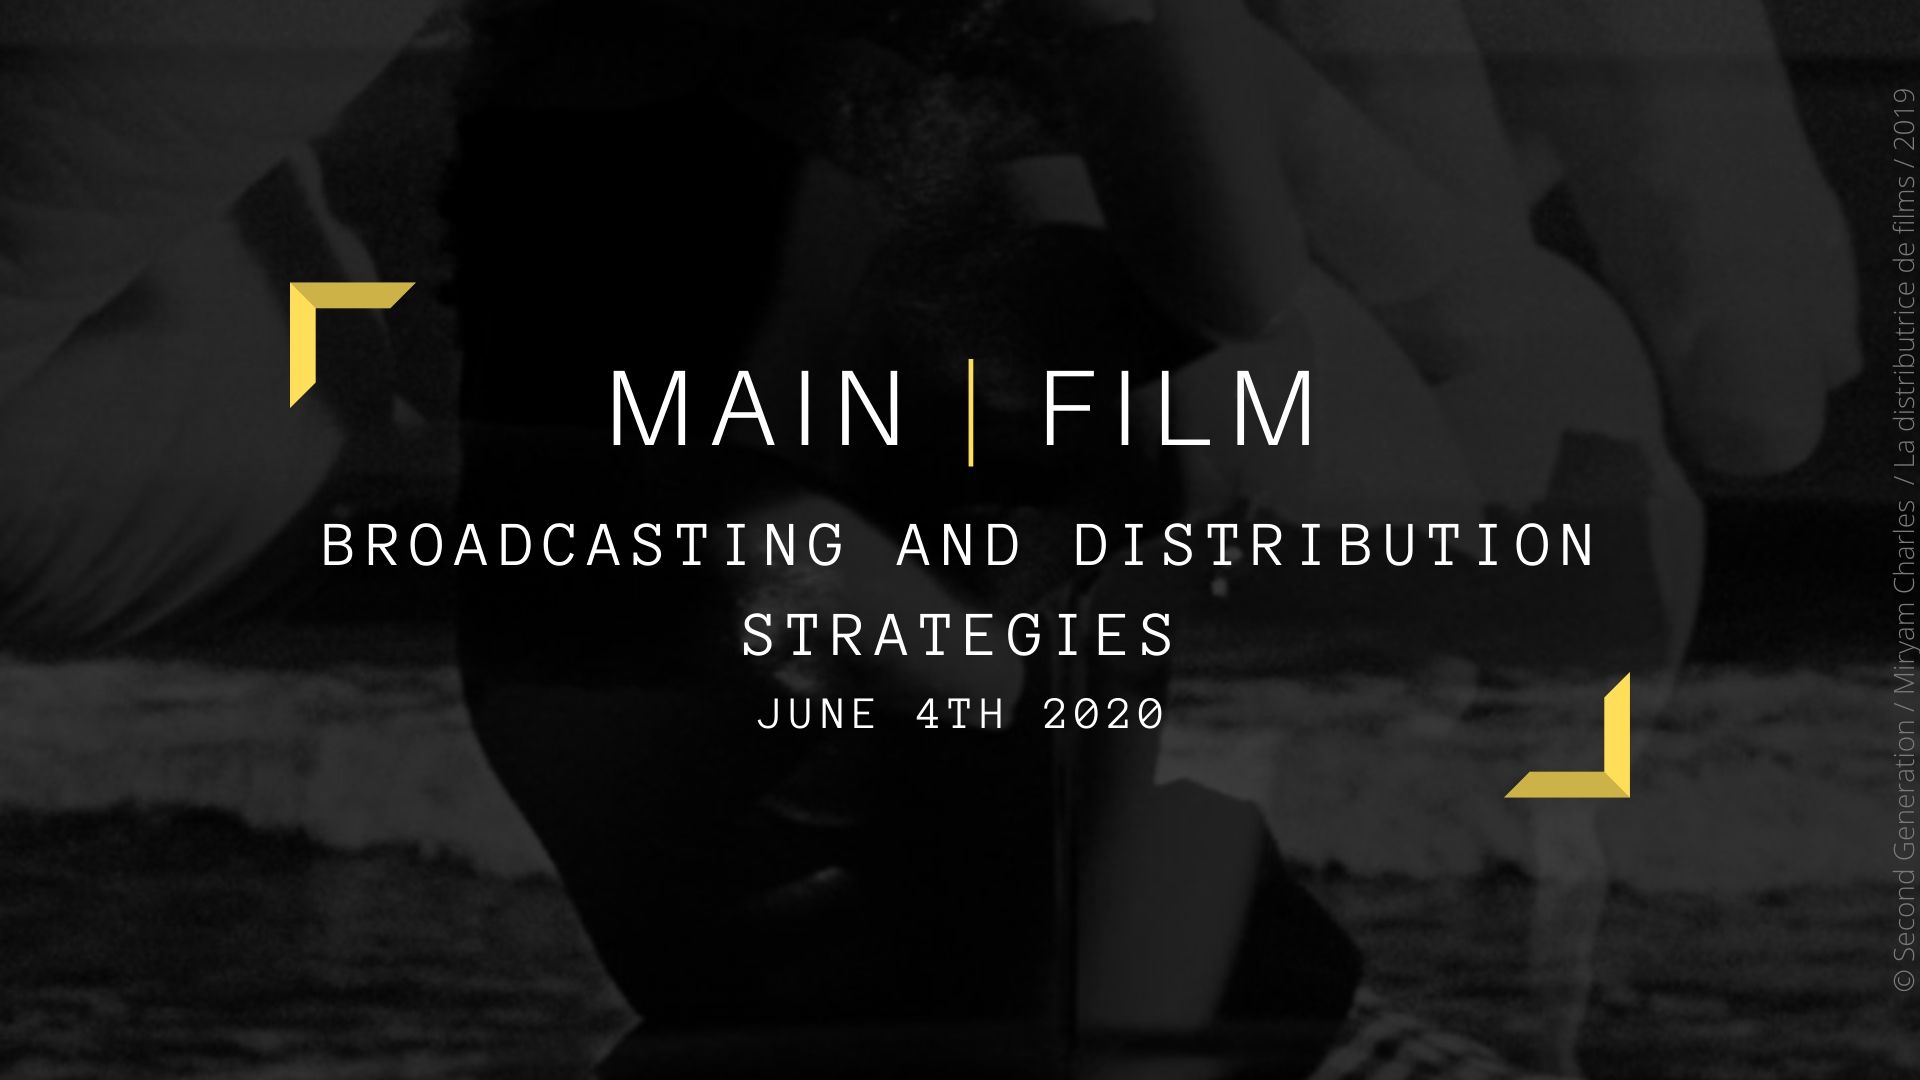 Broadcasting and distribution strategies